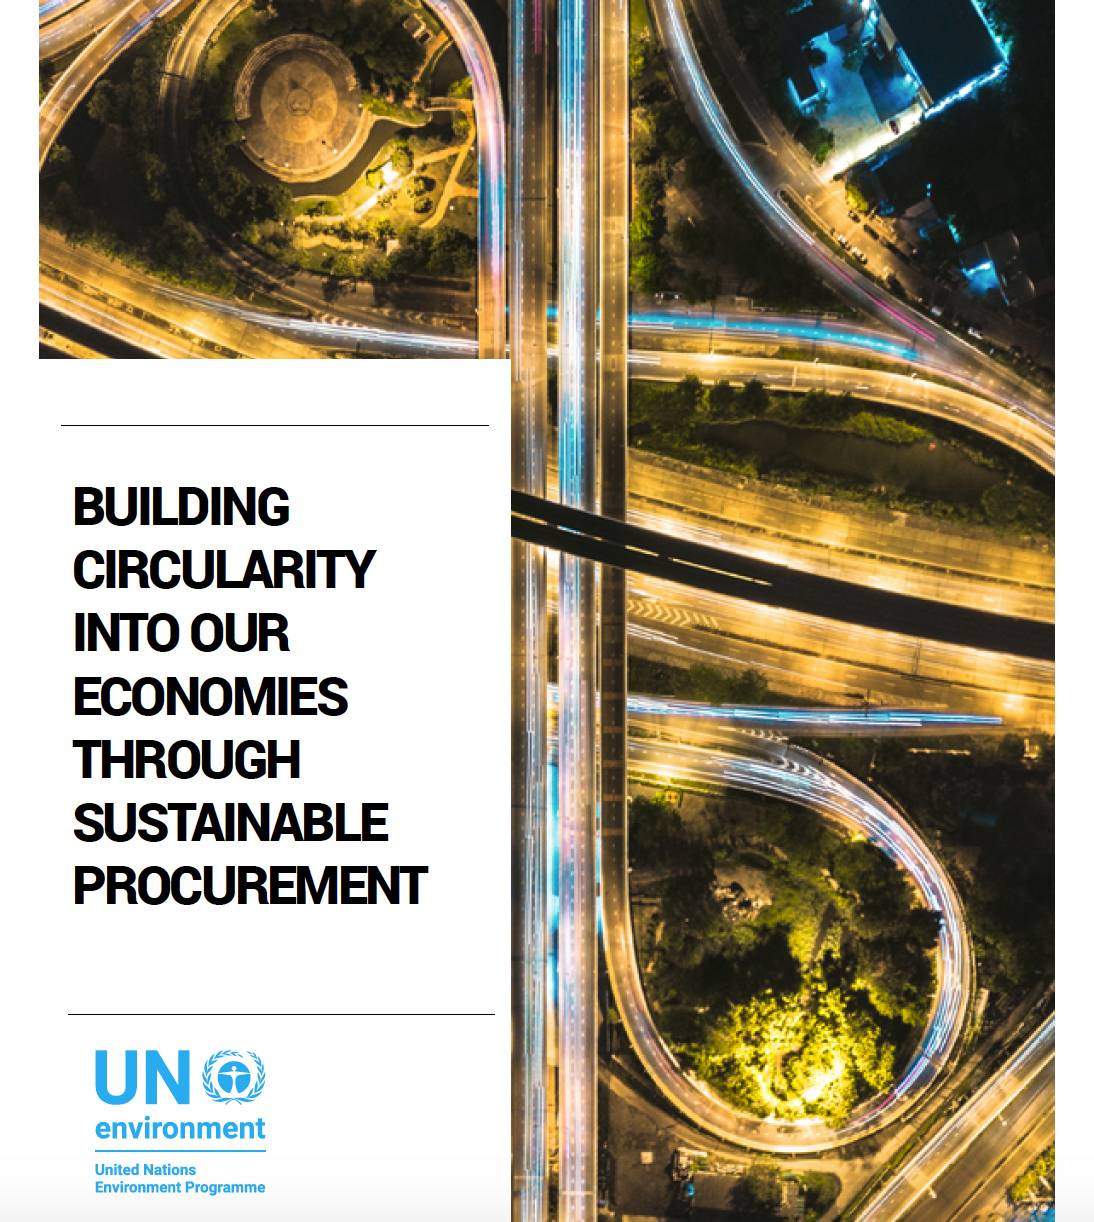 Building Circularity into our Economies through Sustainable Procurement